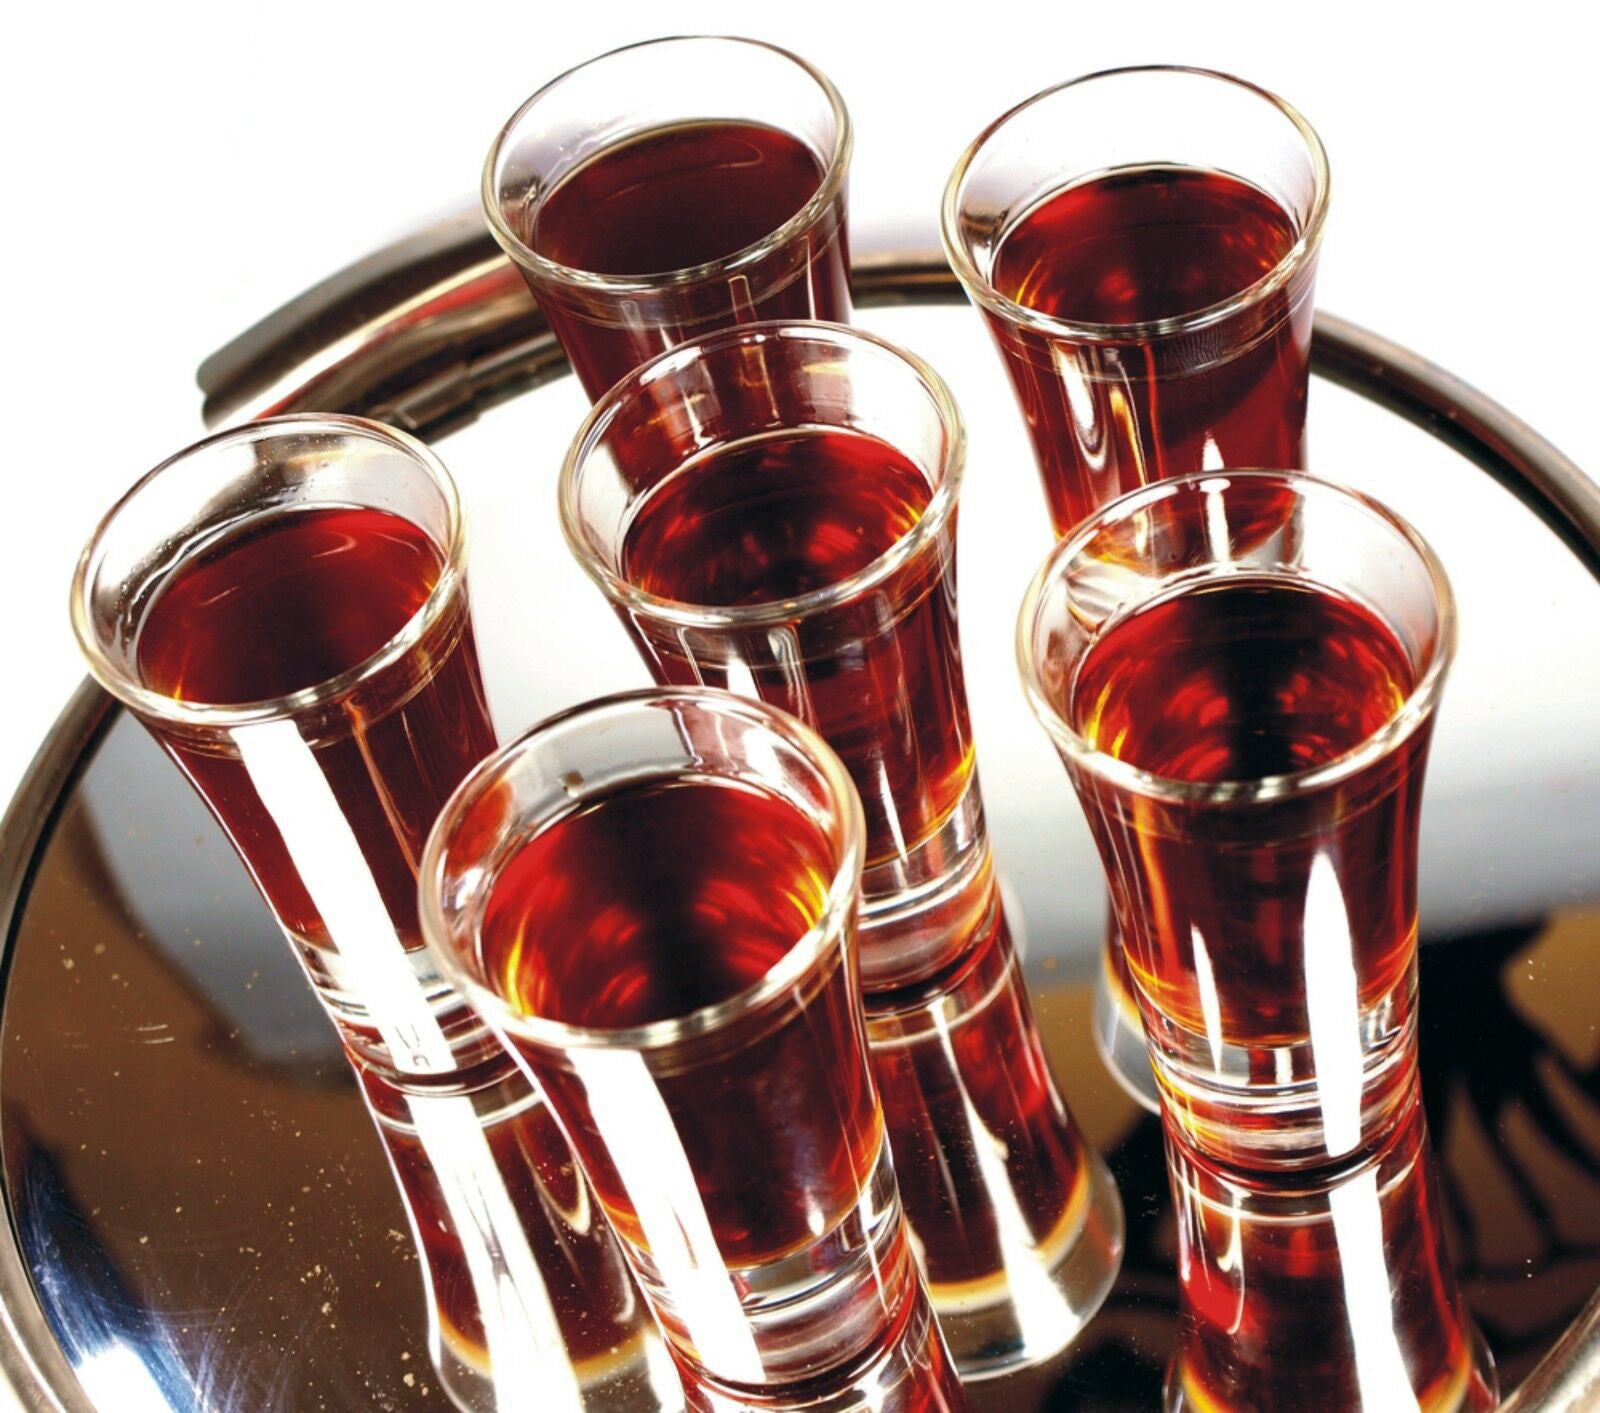 100 x Clear Shot Glasses Heavy Duty Strong Reusable Plastic 25ml CE Marked, Stackable. Bars, Pubs, BBQs, Jelly Shots, Liquor, Spirits-5056020180043-PCUP-SHOTx100-1-Product Pro-25ml, Clear Shot Glasses, Plastic Shot Glasses, Reusable Shot Glasses, Shot Glasses, Shots